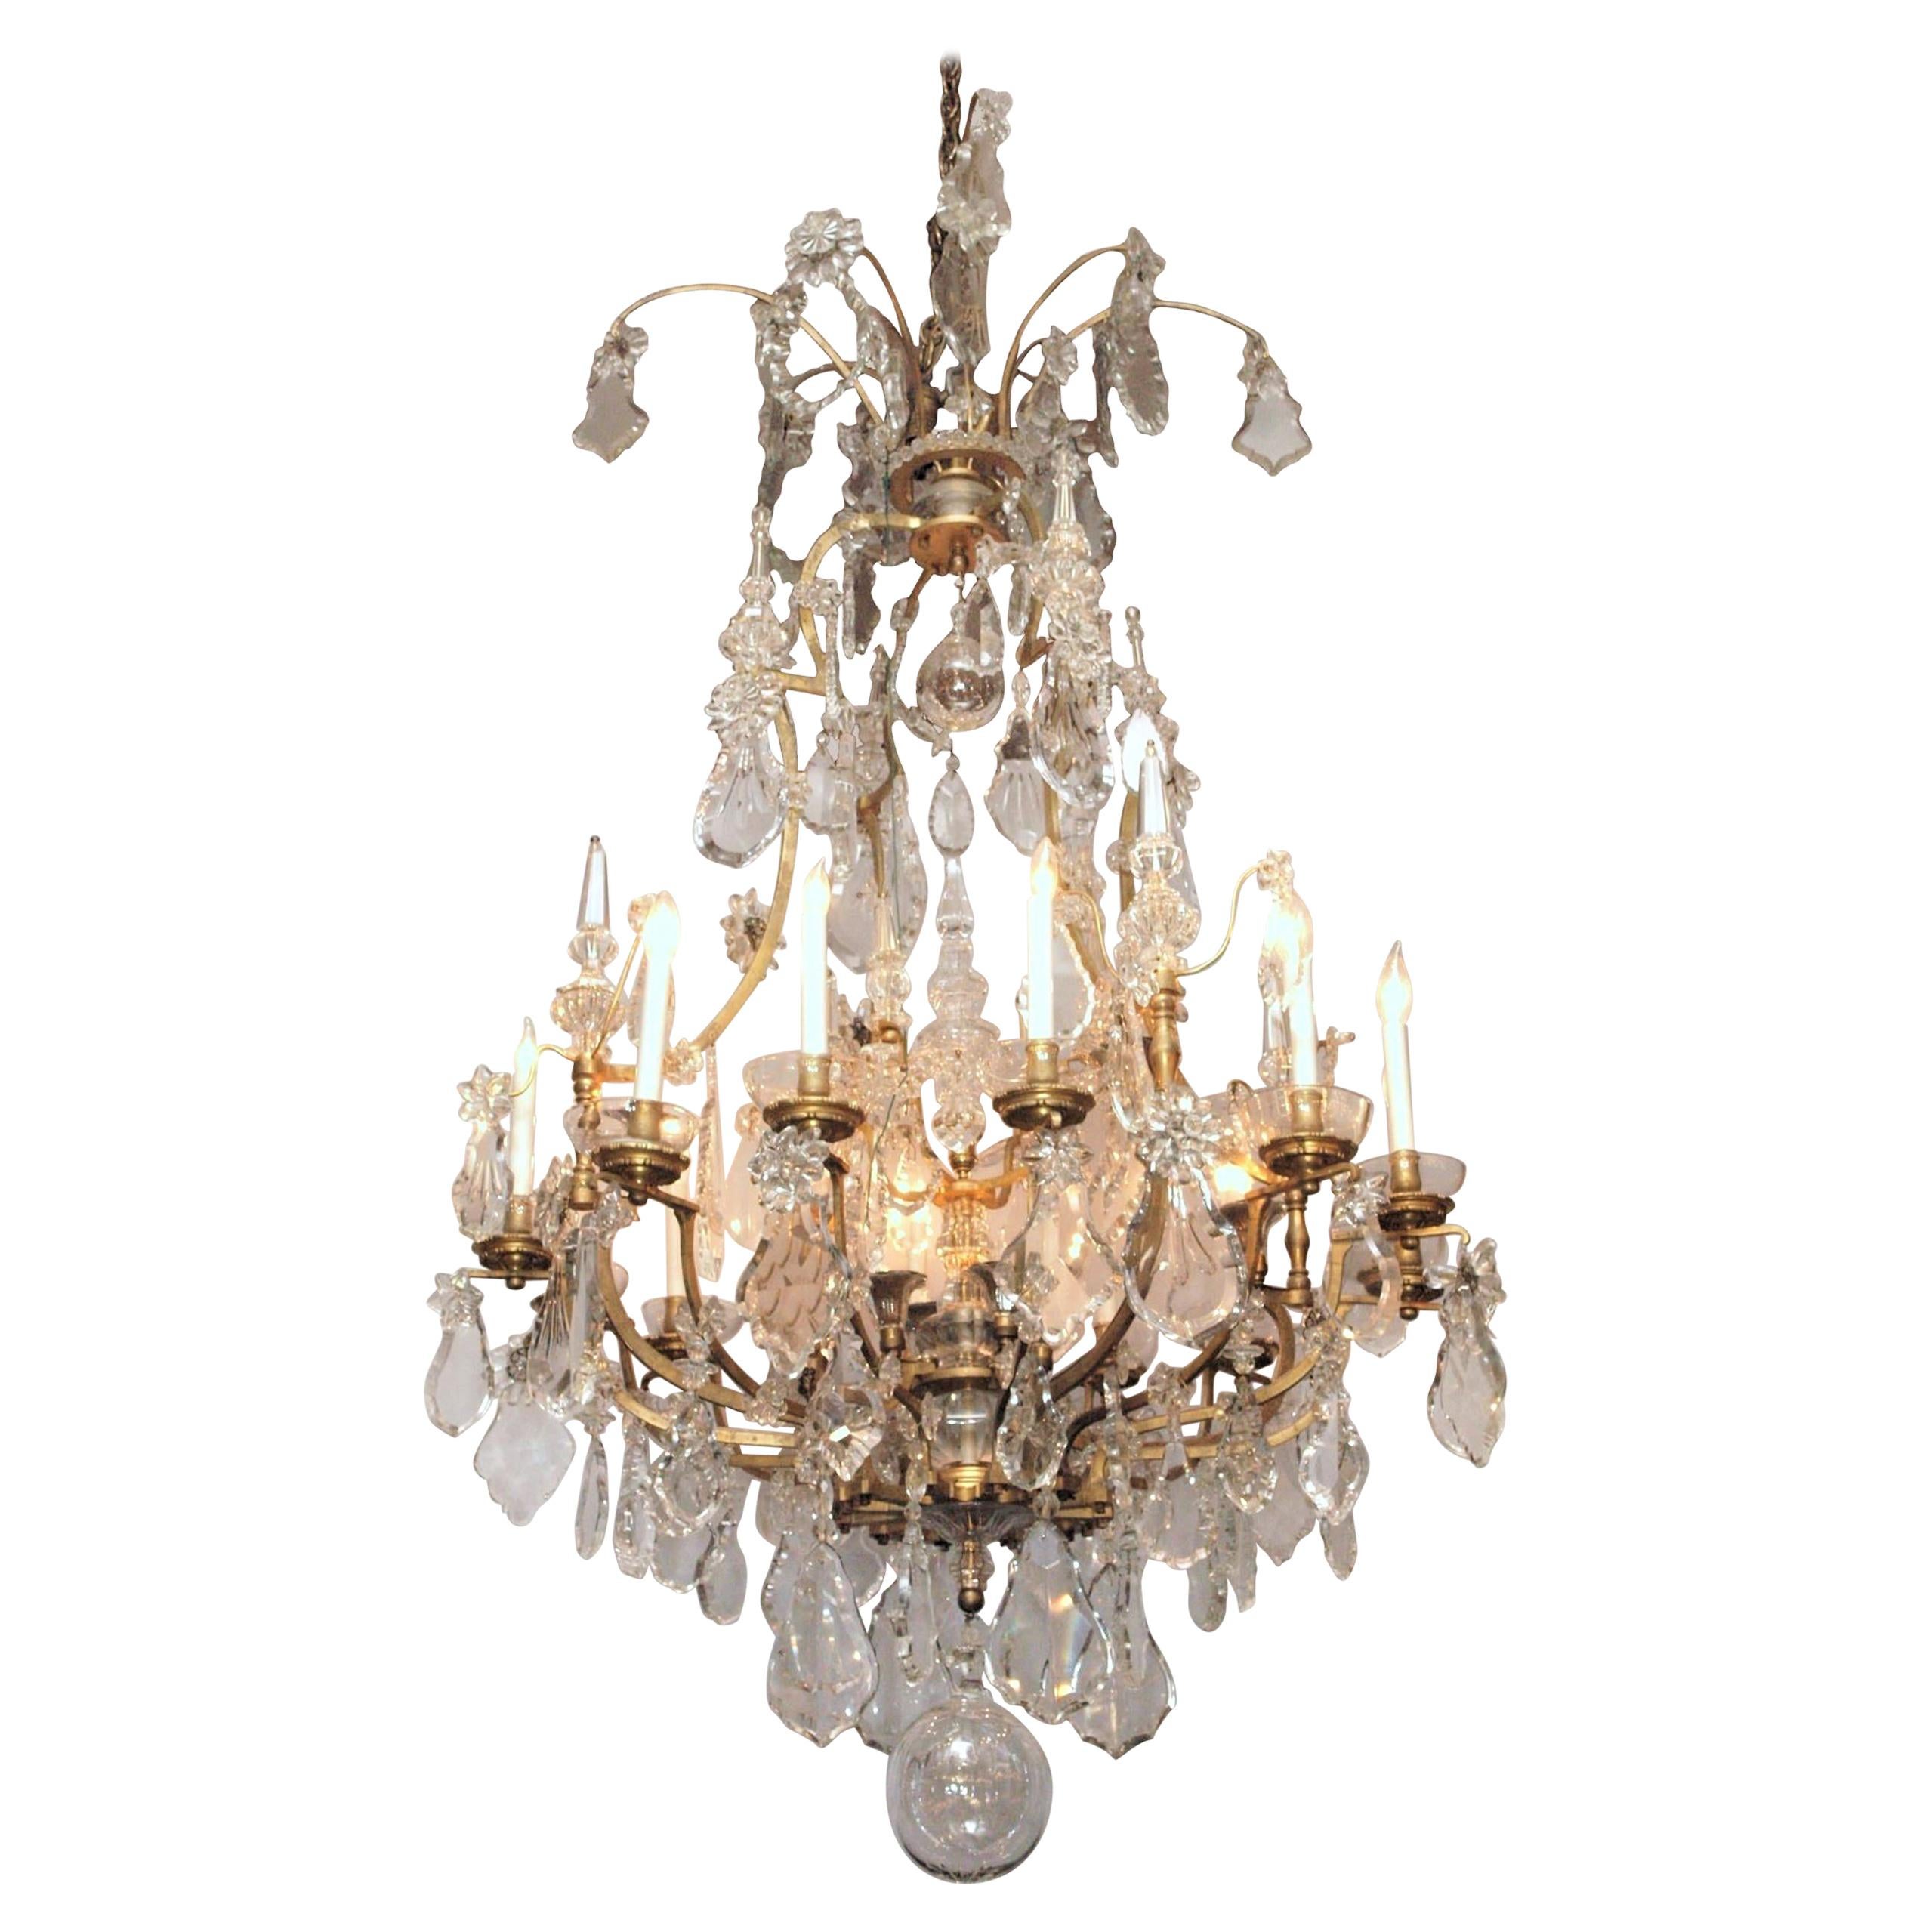 Antique French Baccarat Crystal & Bronze D'Ore Versailles Chandelier, circa 1880 For Sale